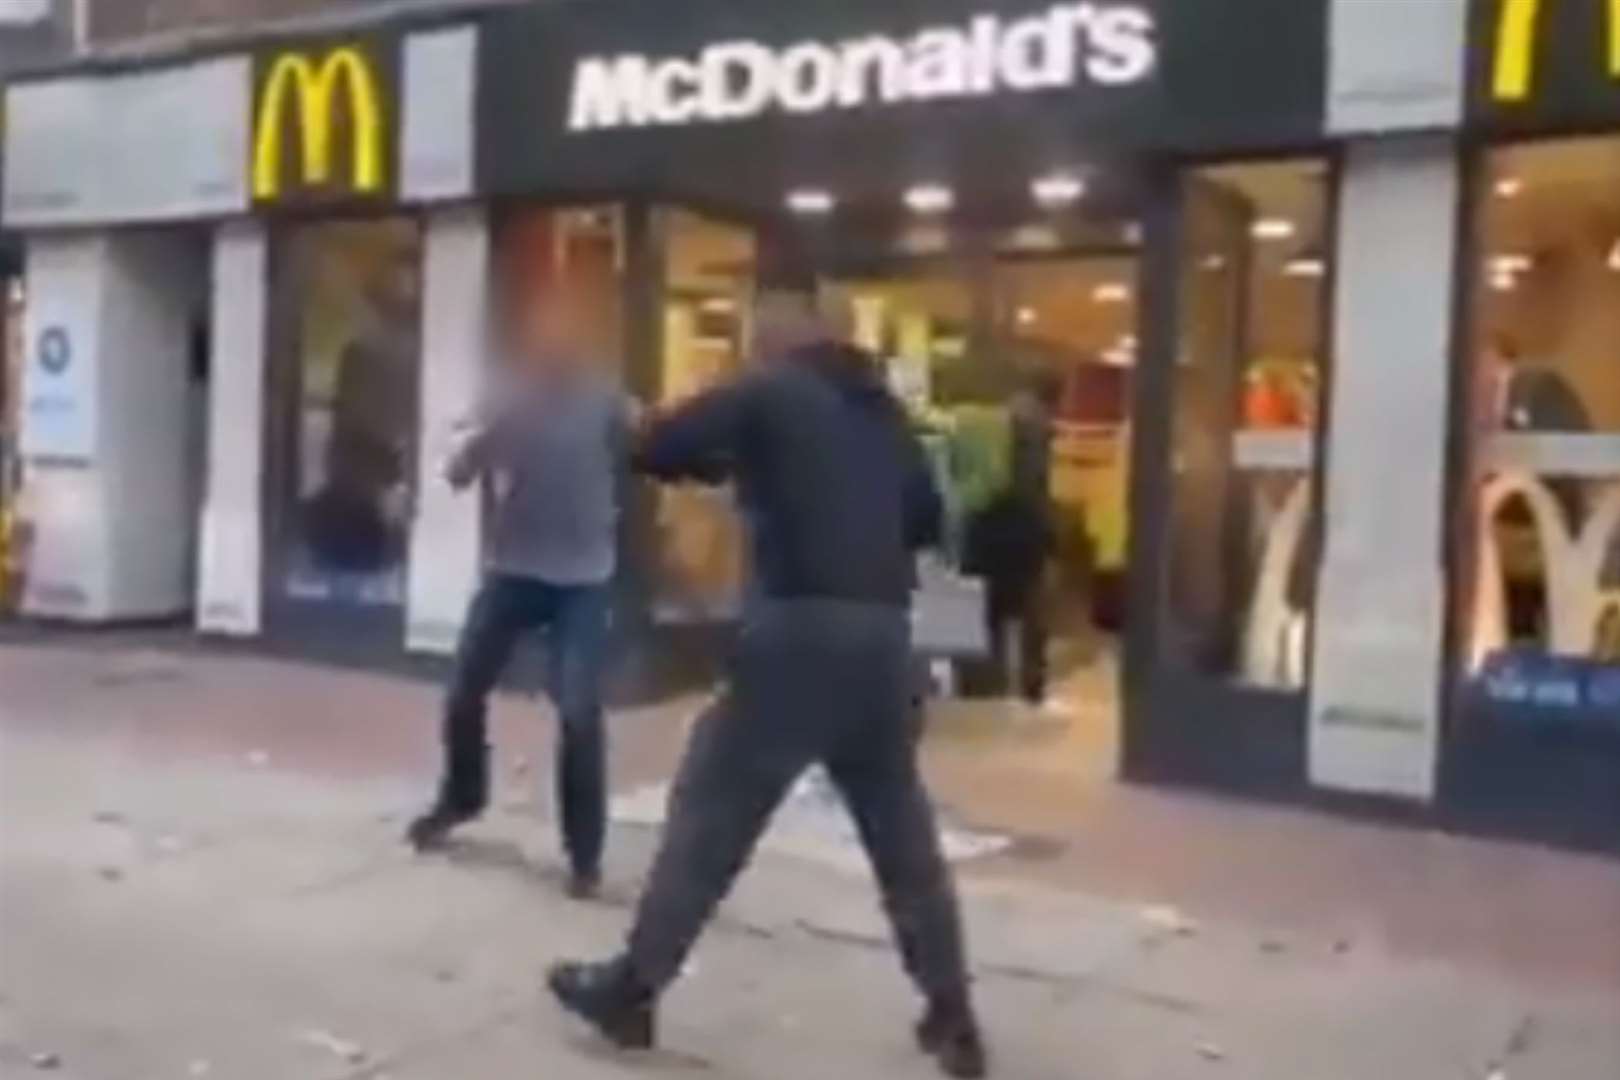 The brawl started outside the town centre's McDonald's